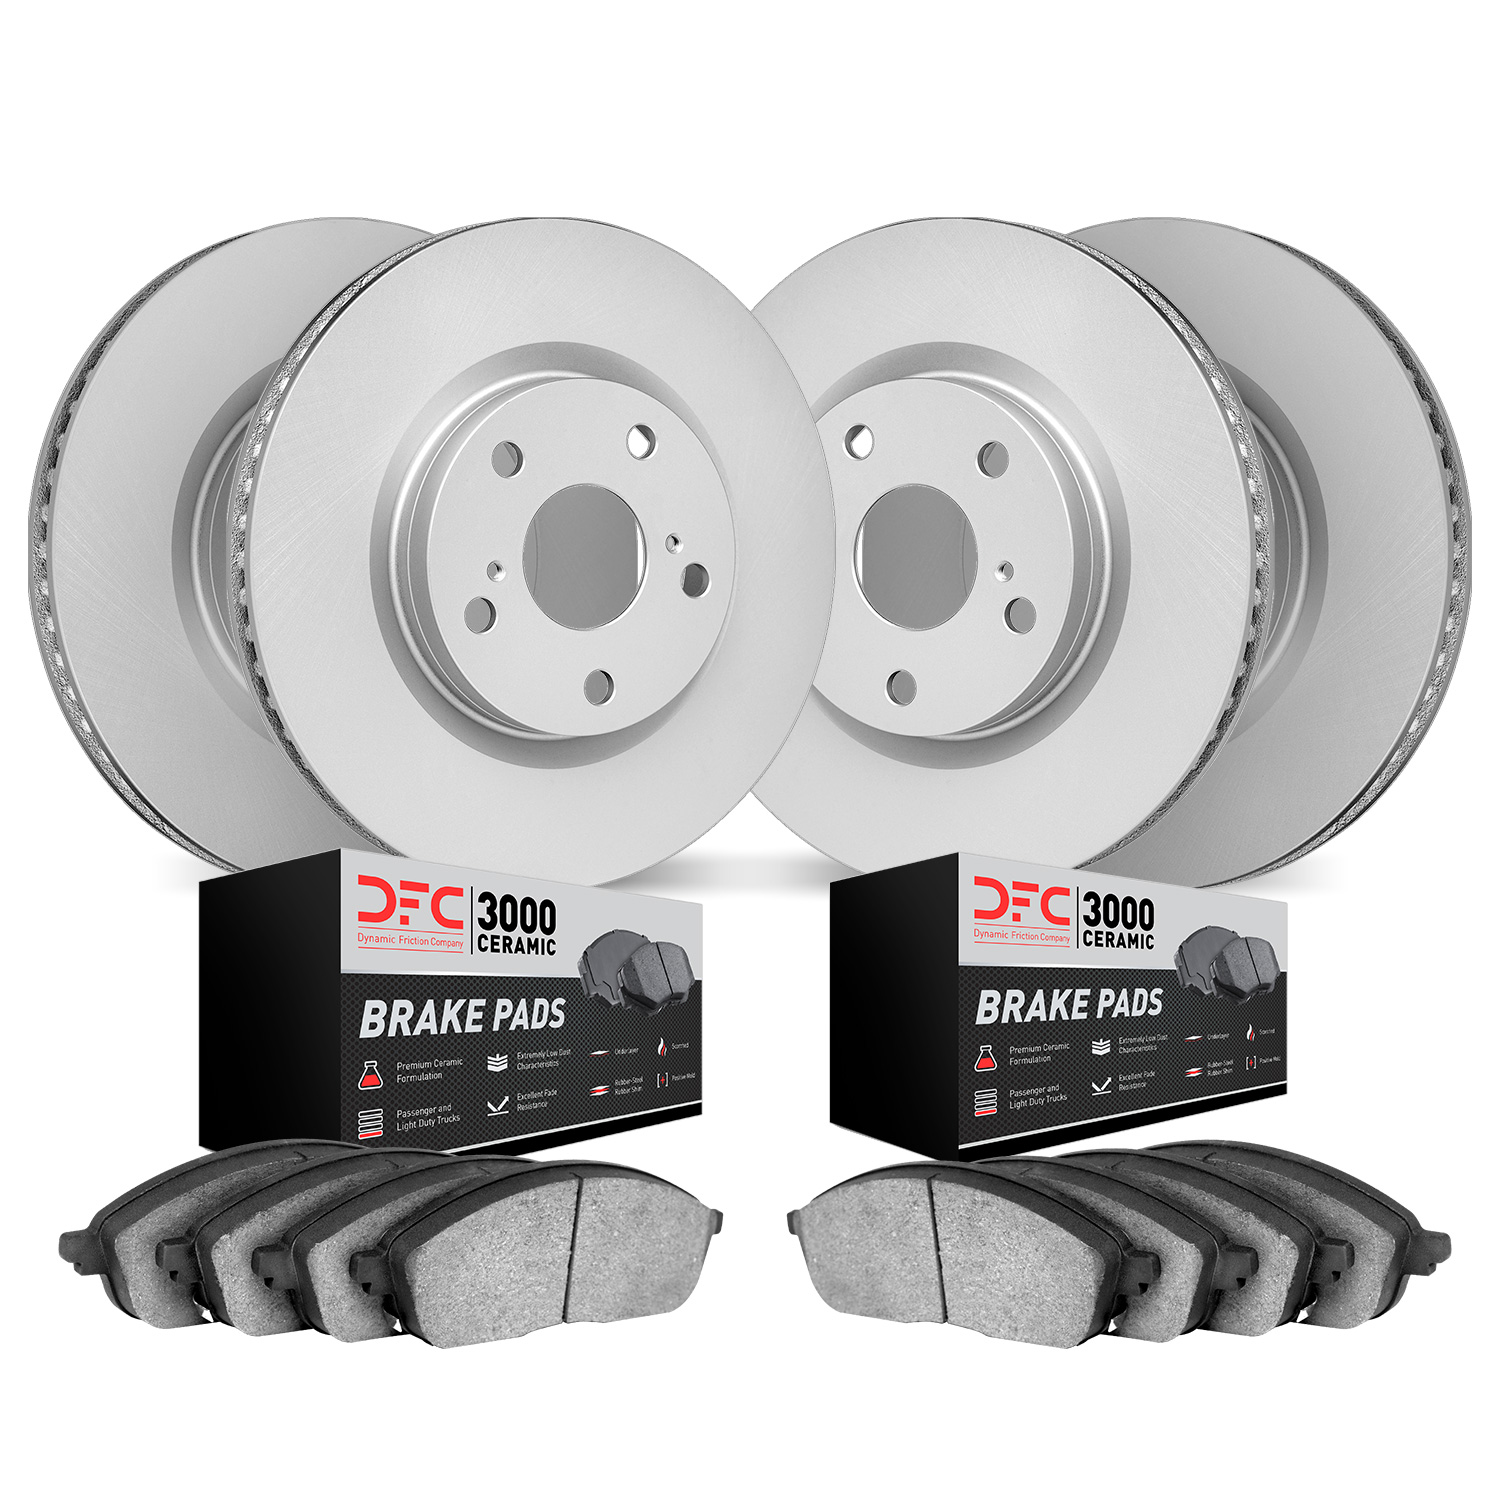 4304-75014 Geospec Brake Rotors with 3000-Series Ceramic Brake Pads Kit, 2009-2011 Lexus/Toyota/Scion, Position: Front and Rear